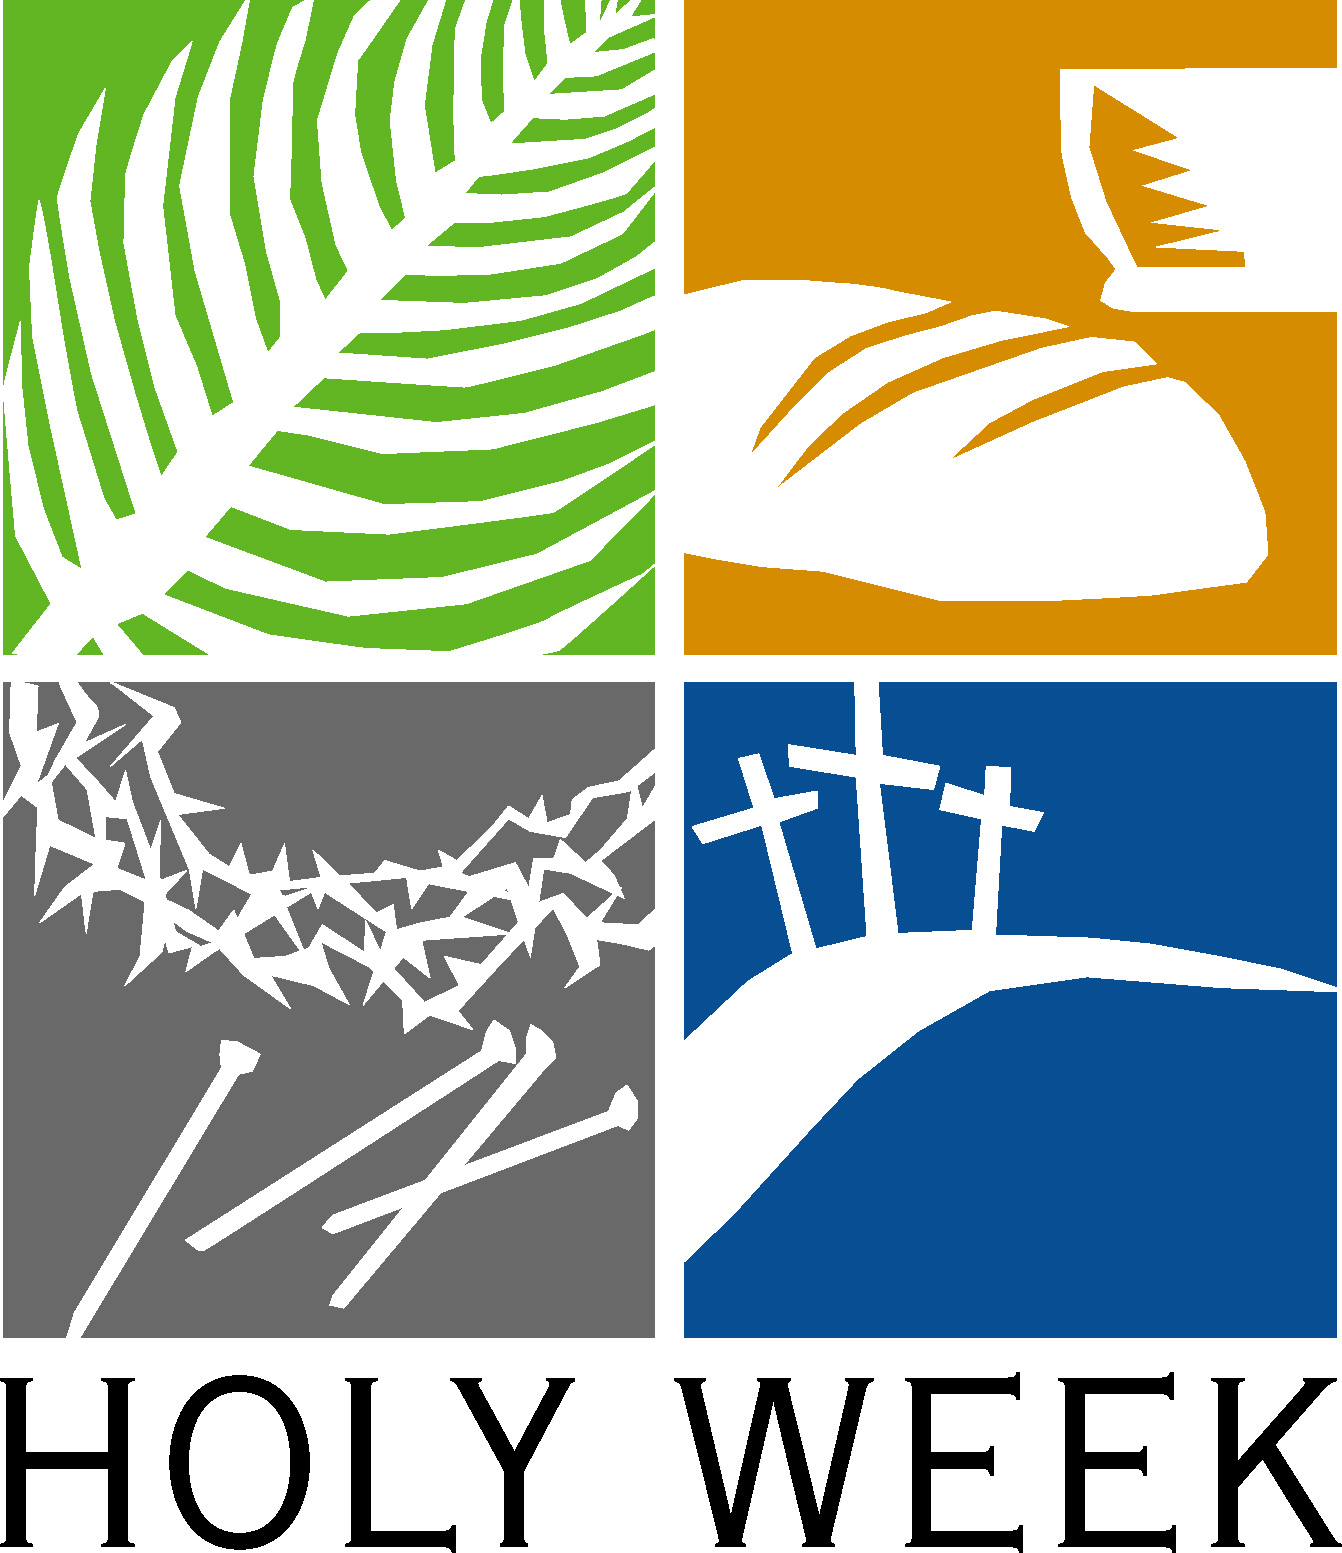 Images of Holy Week - Palms, Cross, Eucharist and Lily